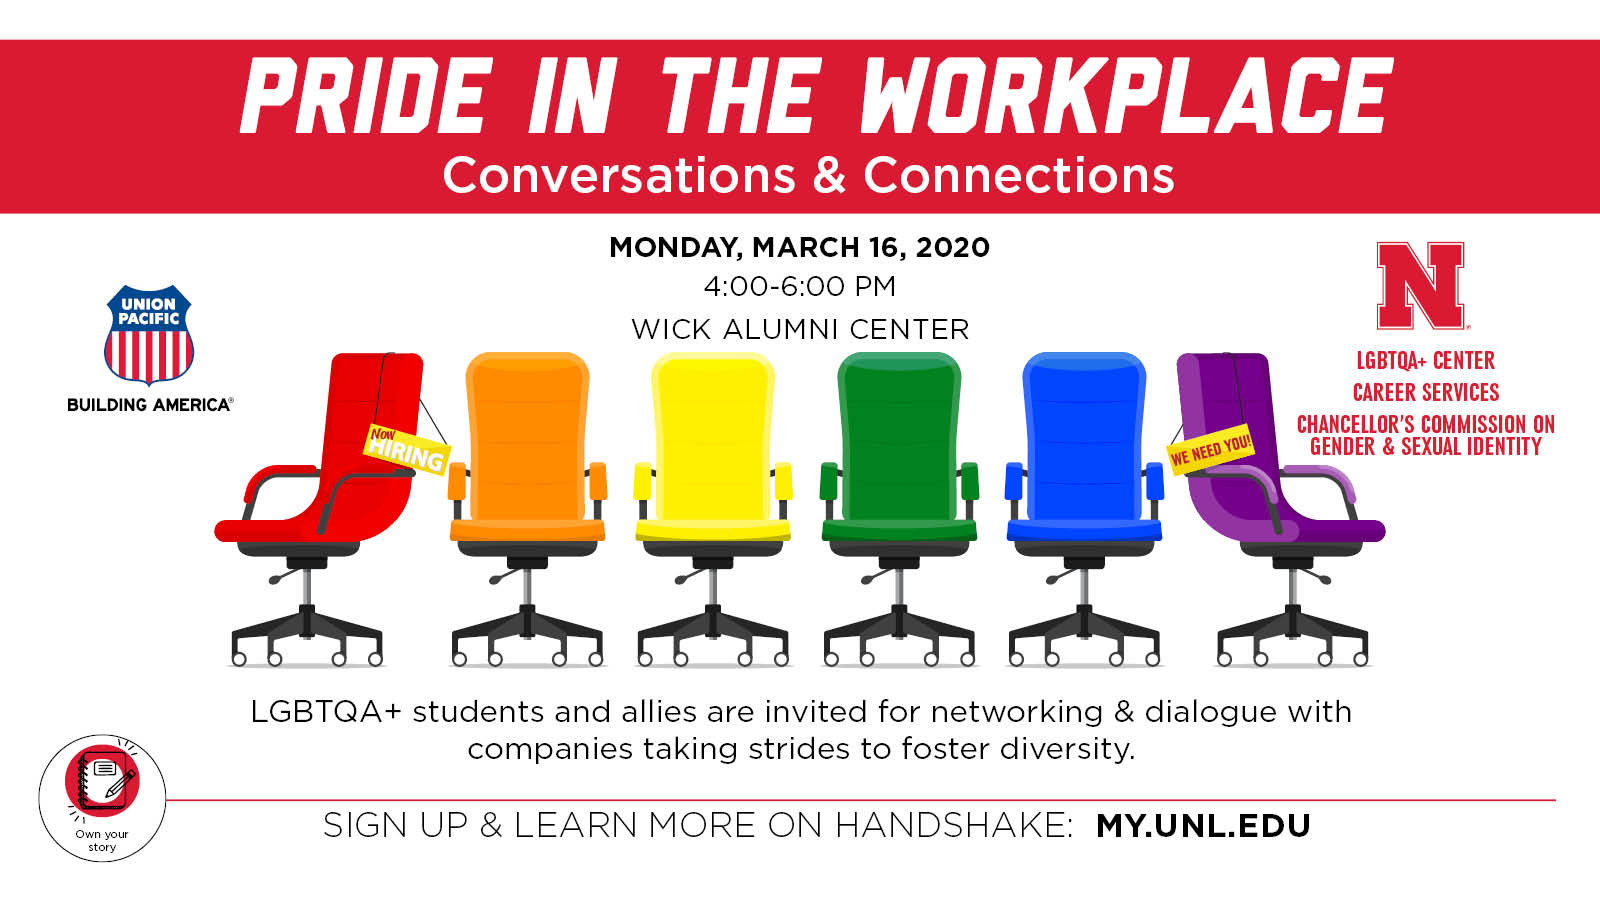 All students who are in the LGBTQA+ community and any student who wants a workplace that's inclusive and equitable to LGBTQA+ folks are welcome to attend.